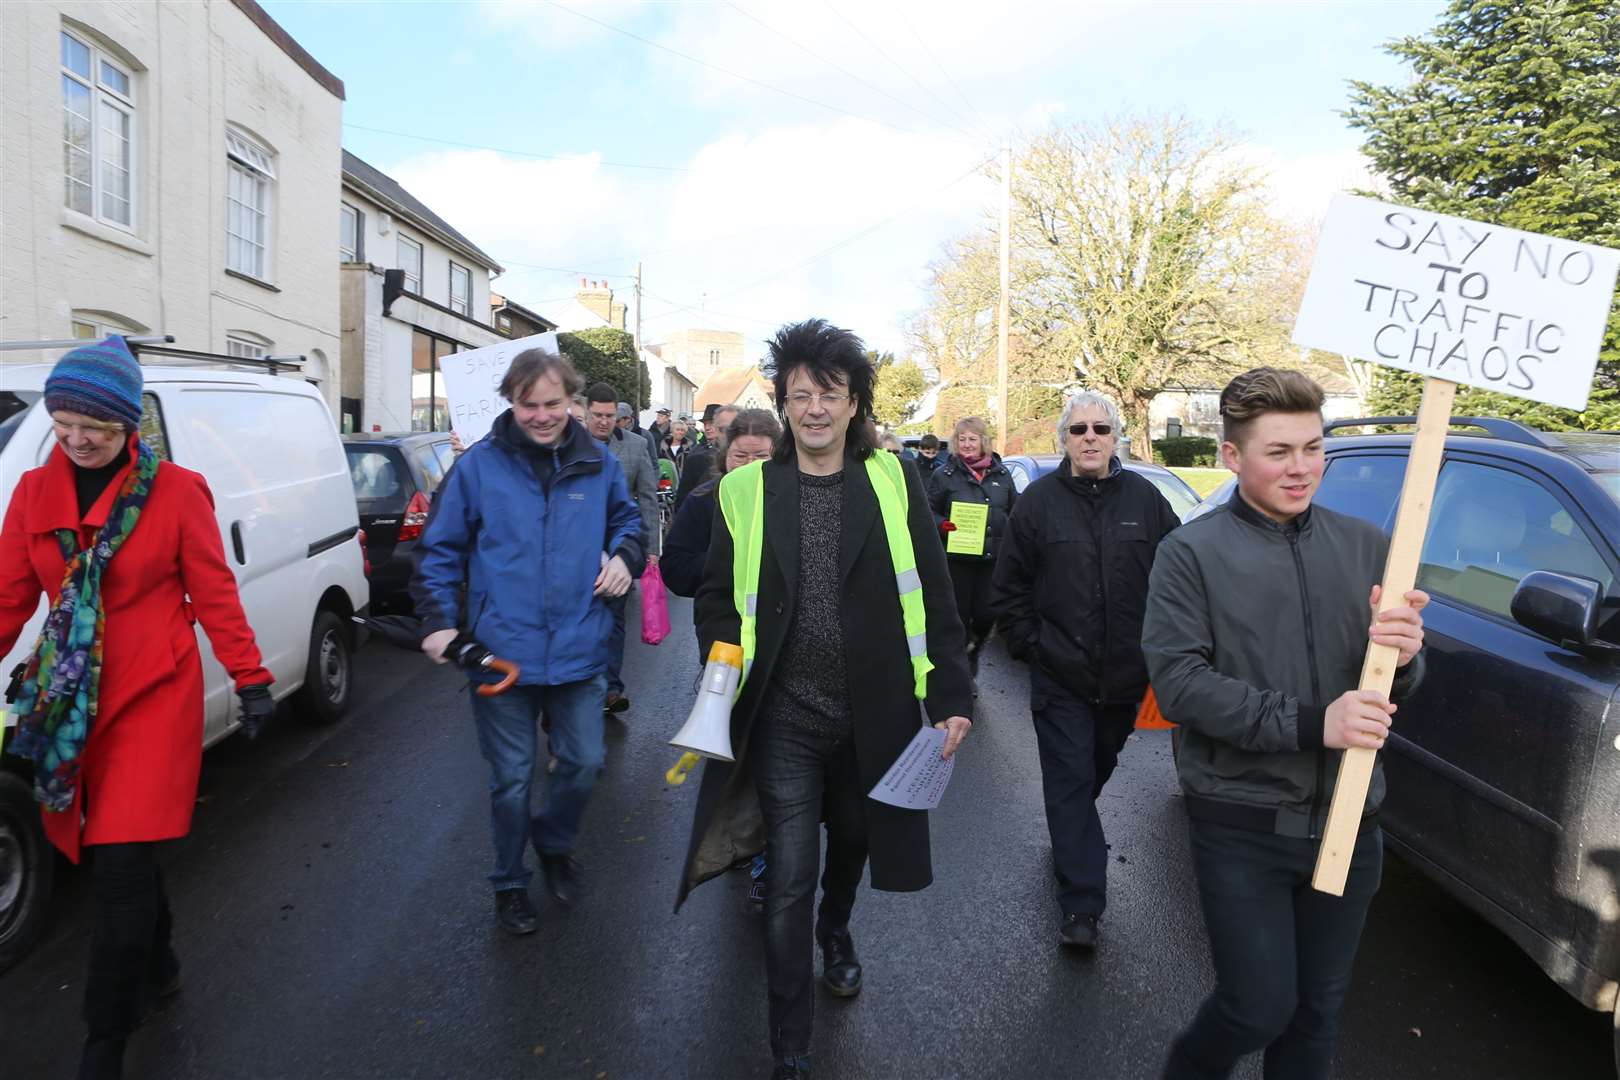 Mike Baldock and Borden resident marching against developers. Picture: John Westhrop